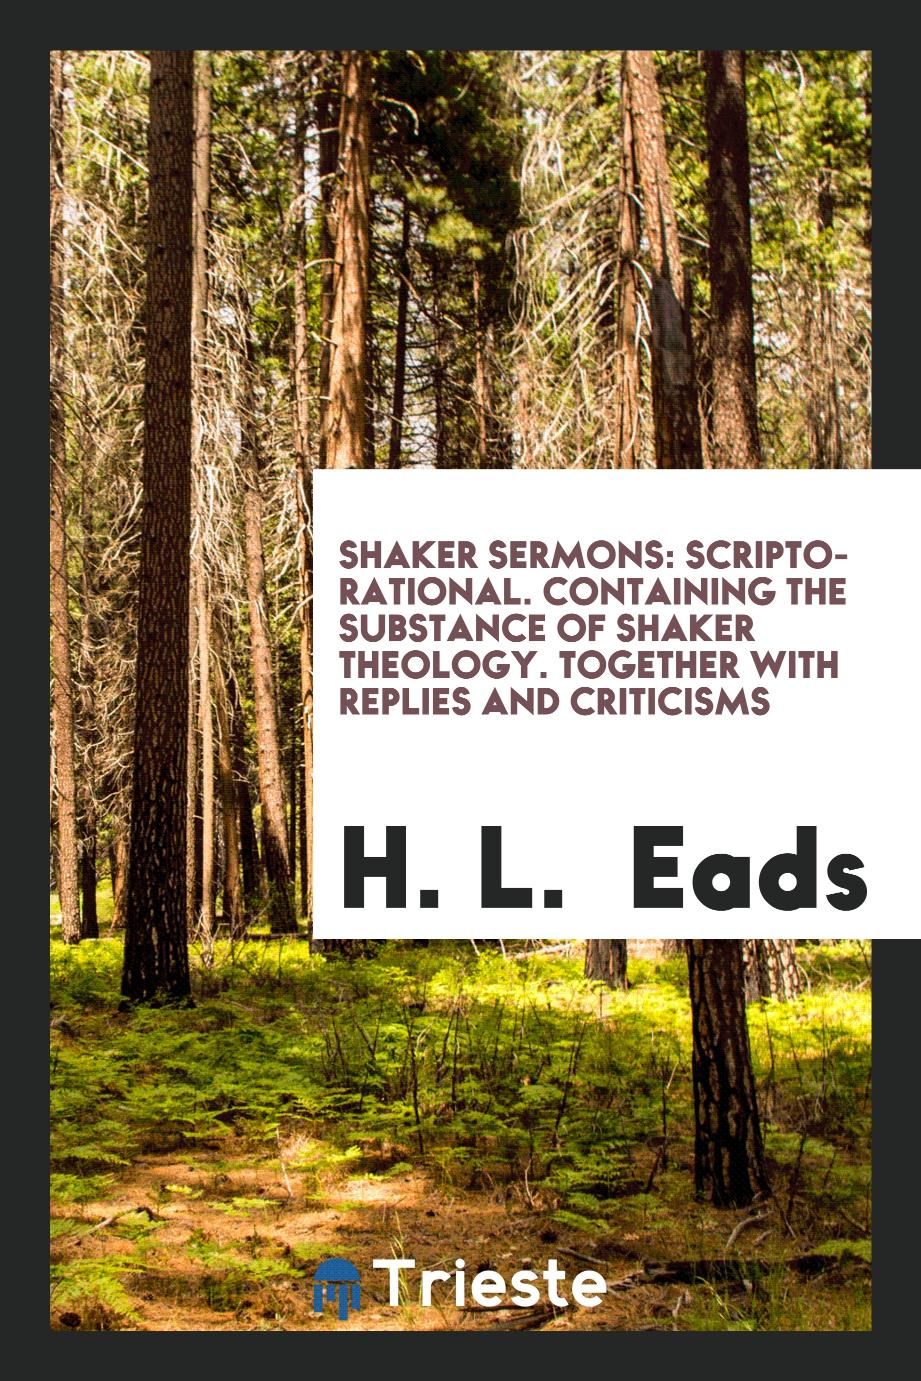 Shaker Sermons: Scripto-Rational. Containing the Substance of Shaker Theology. Together with Replies and Criticisms